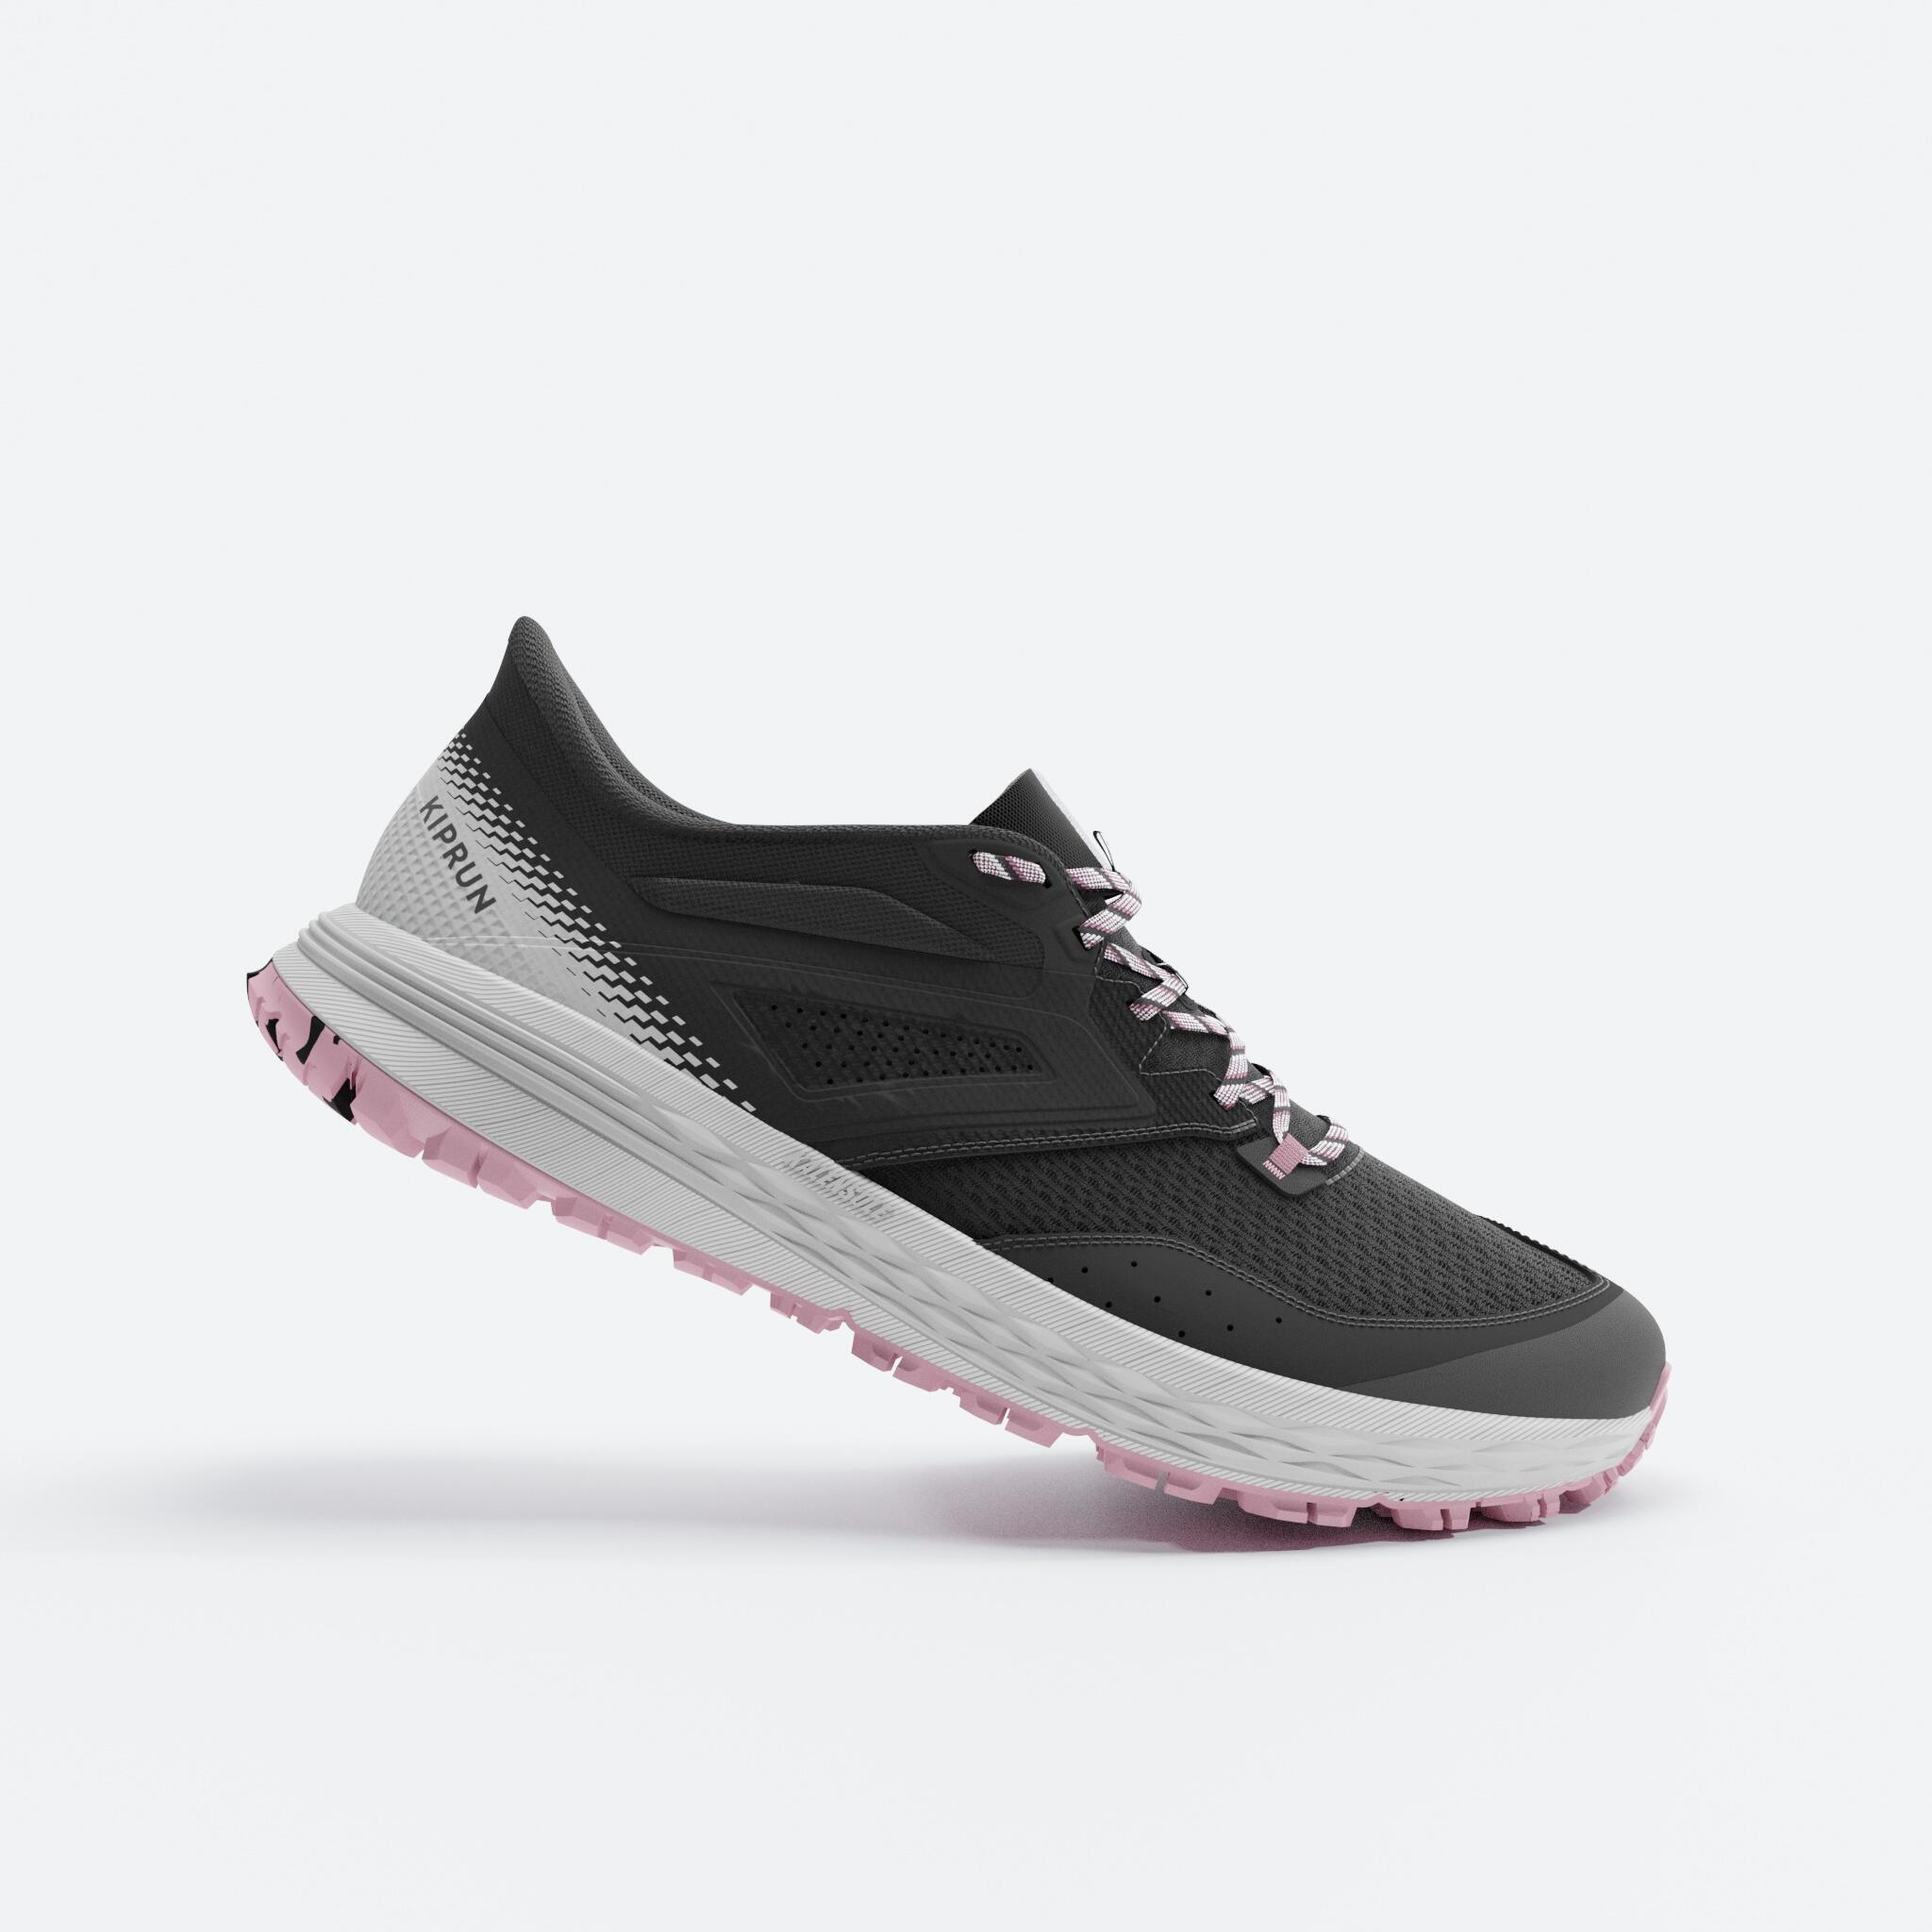 Women's Trail Running Shoes - TR2